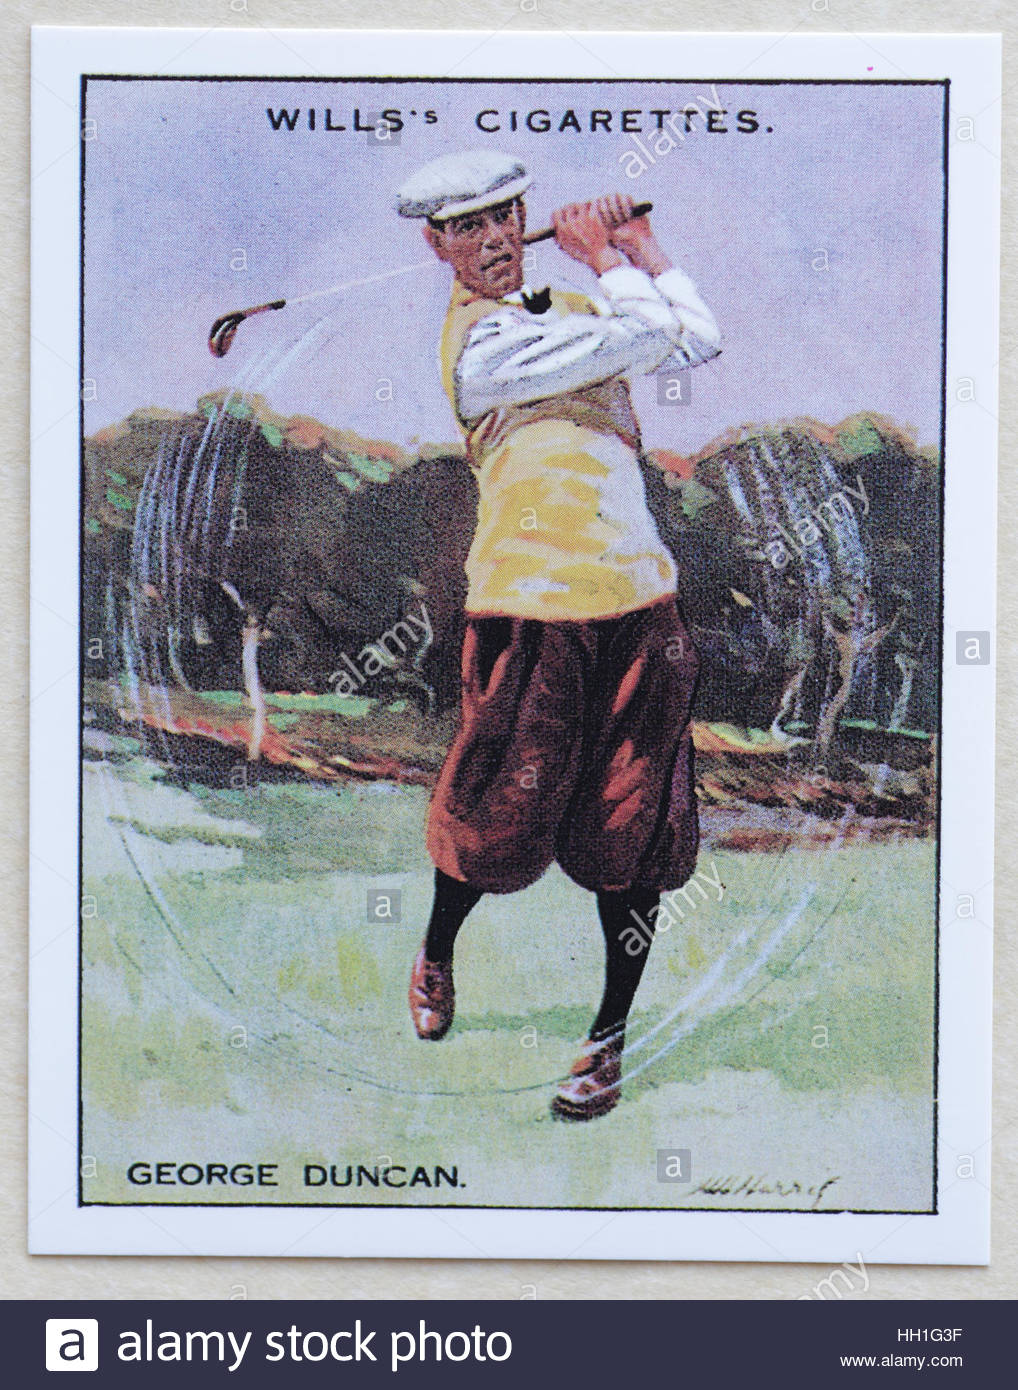 George Duncan, 1883 – 1964,  - Famous Golfers, cigarette cards issued in 1930 by W.D.& H.O. Wills cigarettes. Stock Photo